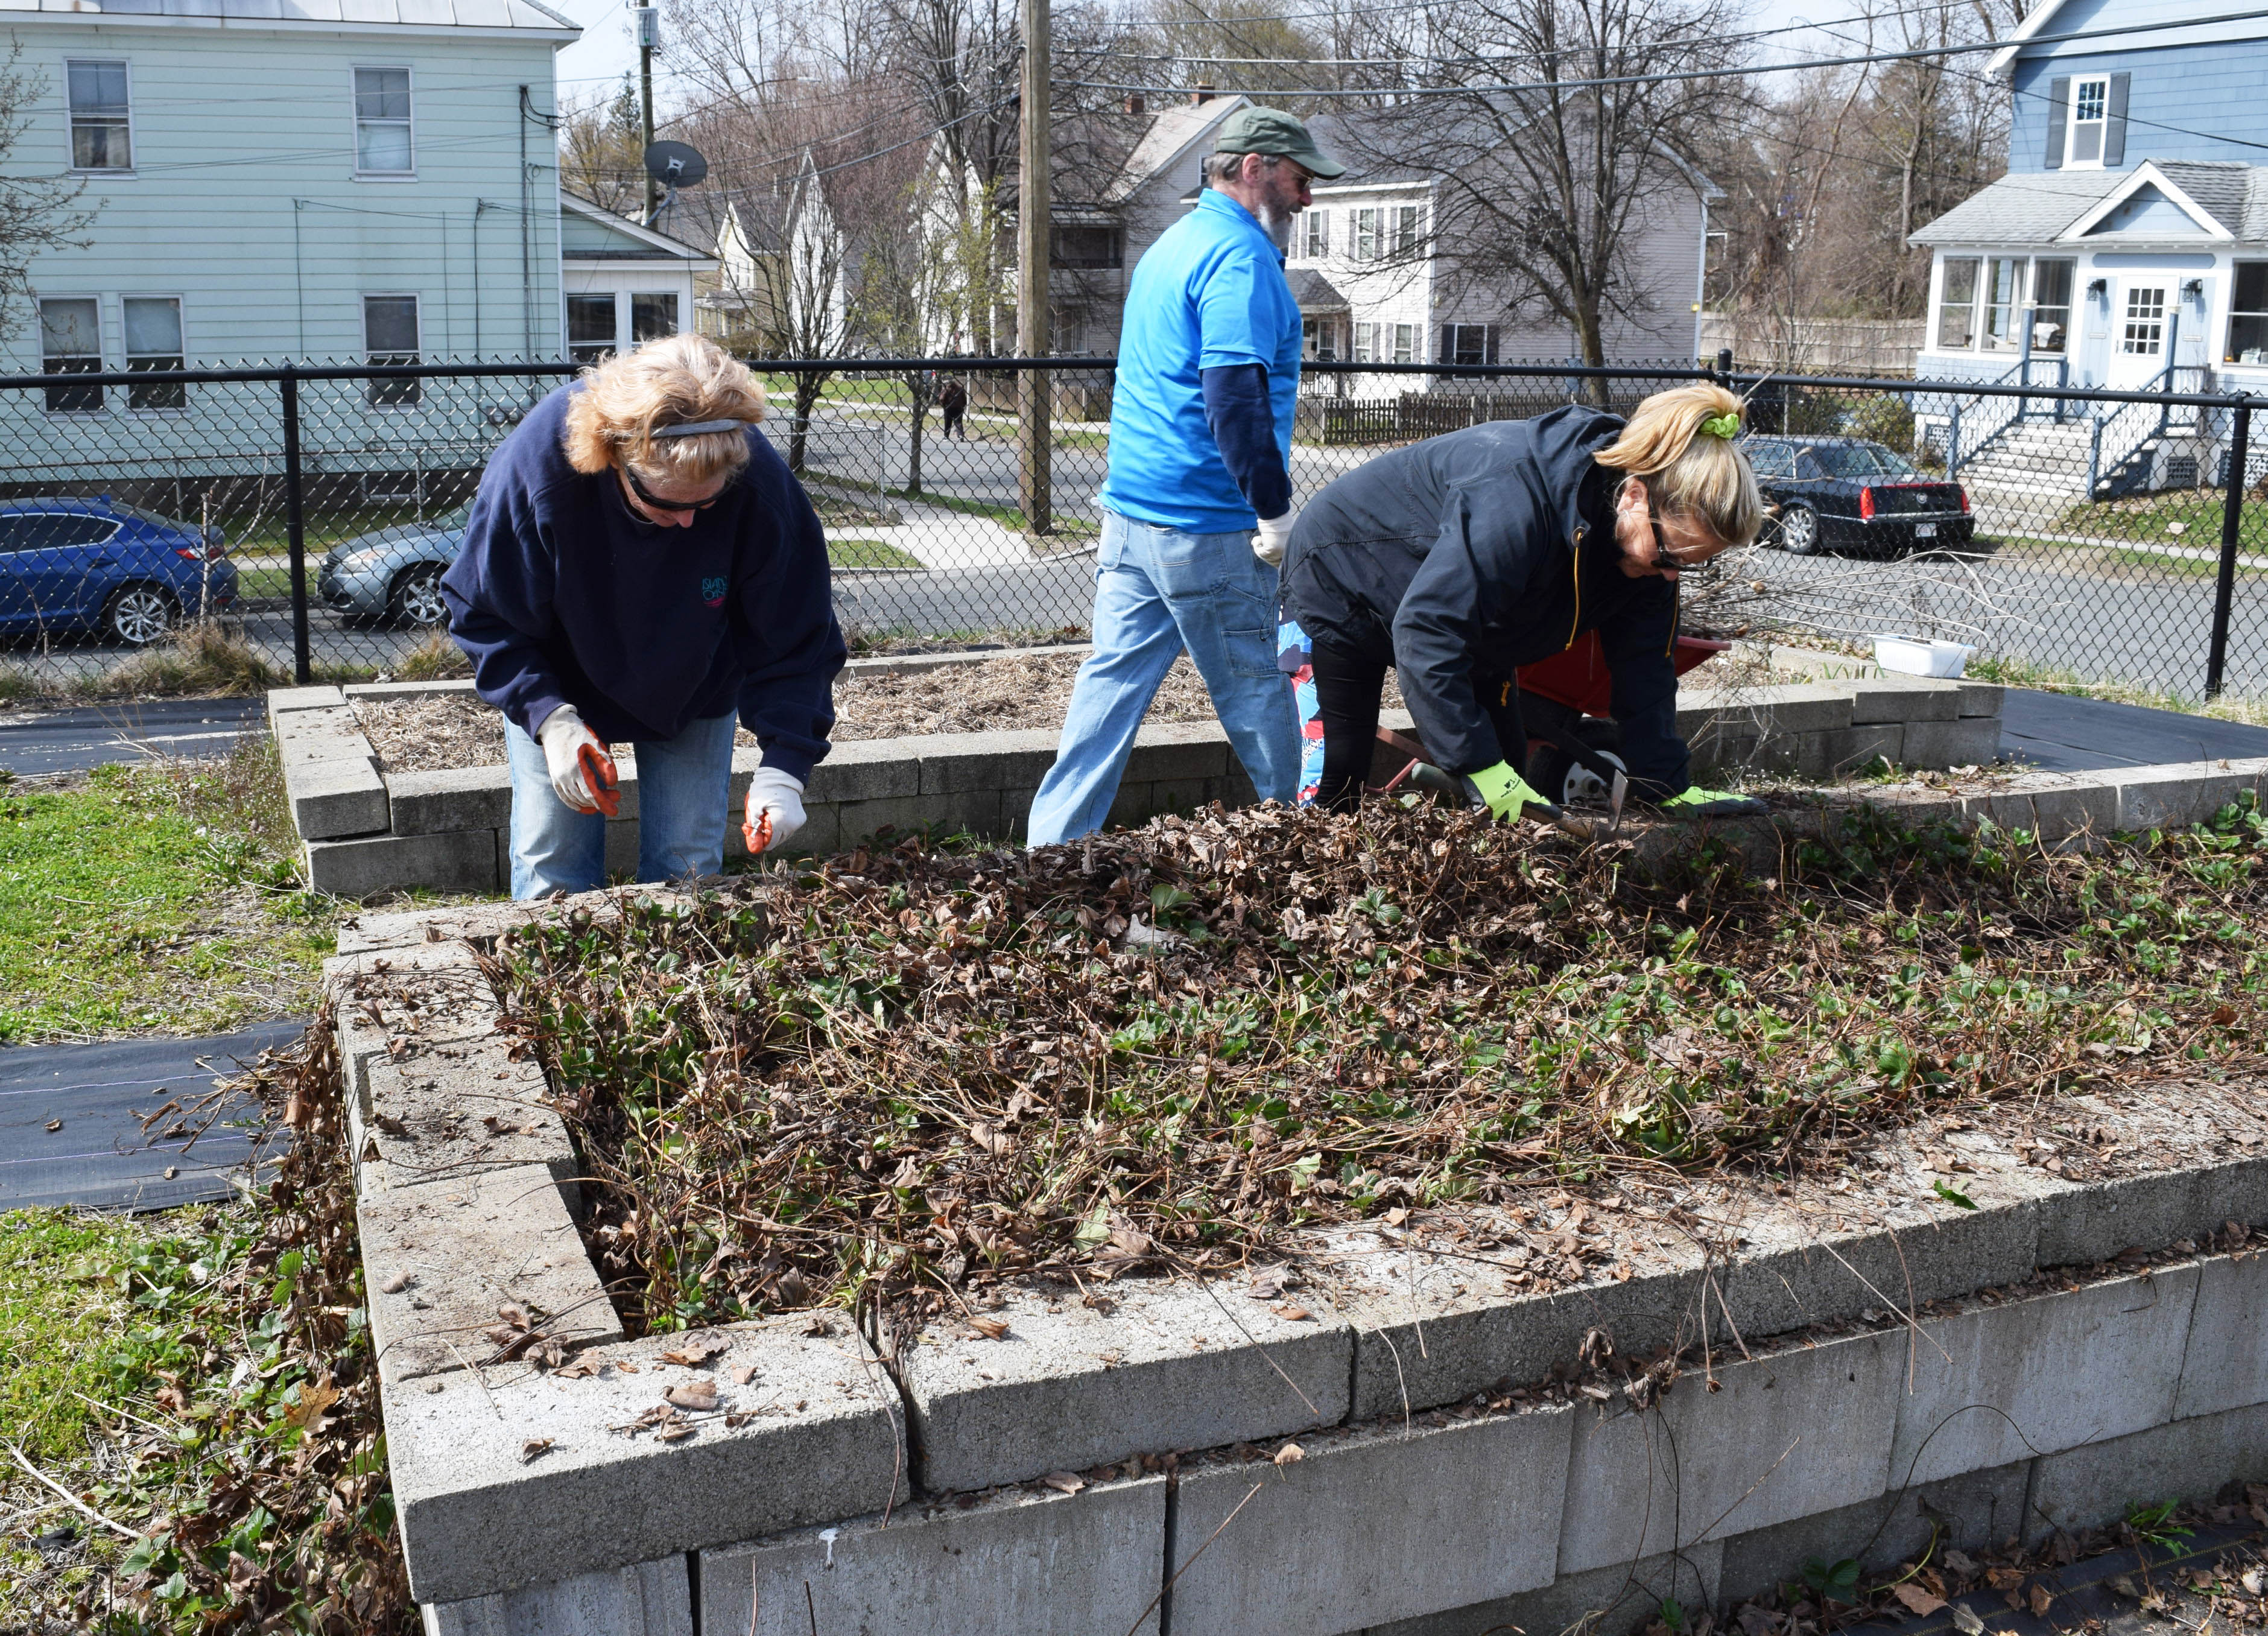 Two volunteers from UNICO clean up the strawberry bed